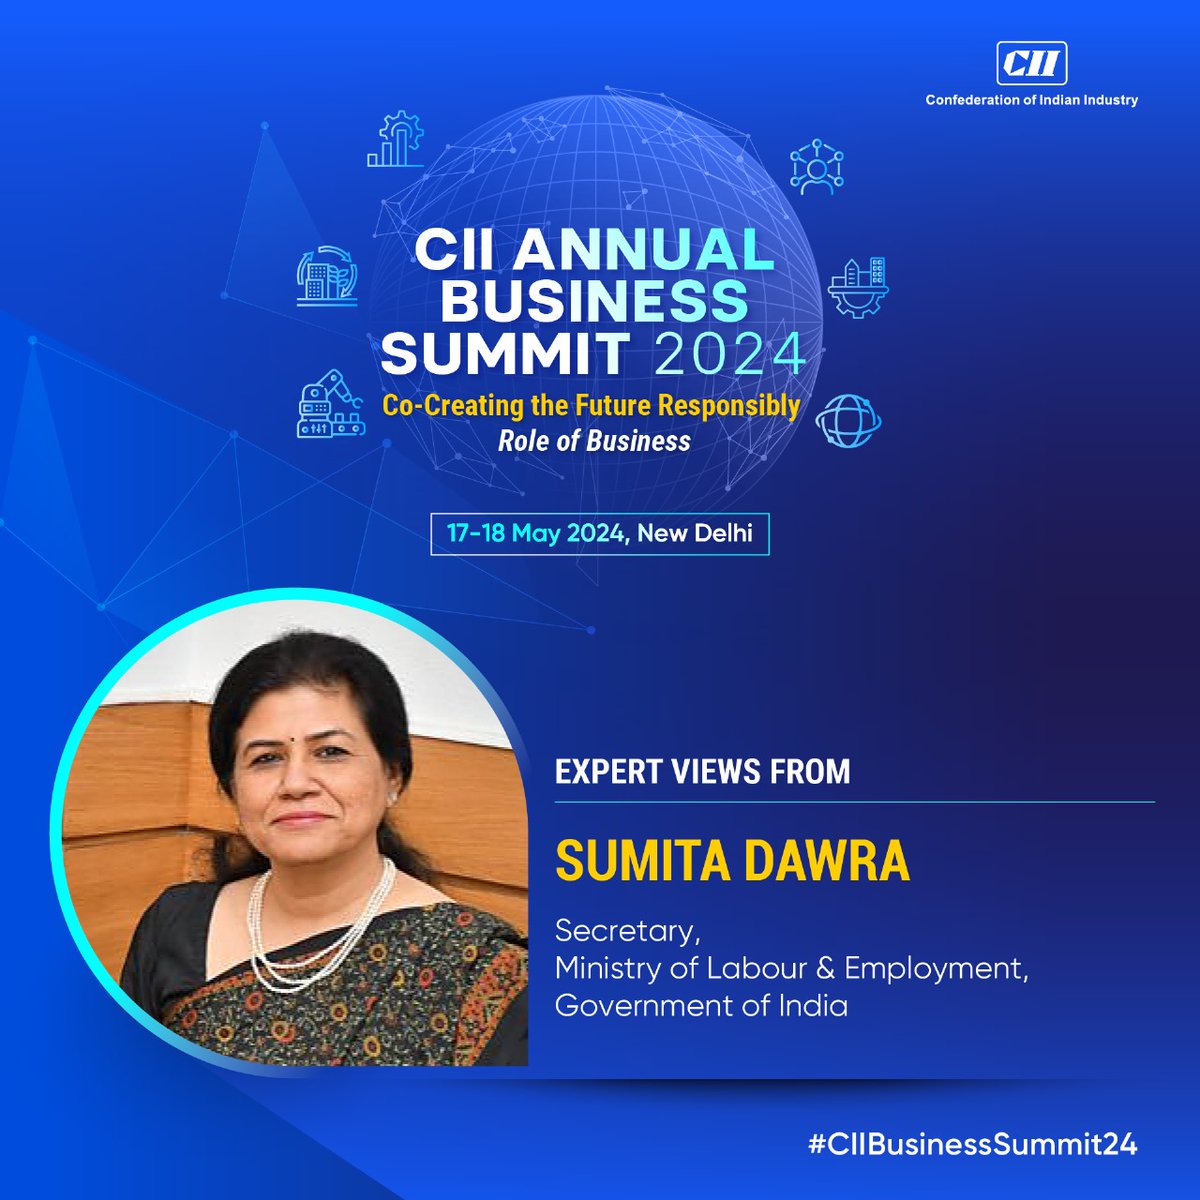 Listen to @SumitaDawra, Secretary, @LabourMinistry, Government of India share insights at the CII Annual Business Summit 2024. Join the discussion as top experts and thought leaders deliberate on India's journey towards development and economic prosperity. #StayTuned ➡17-18 May